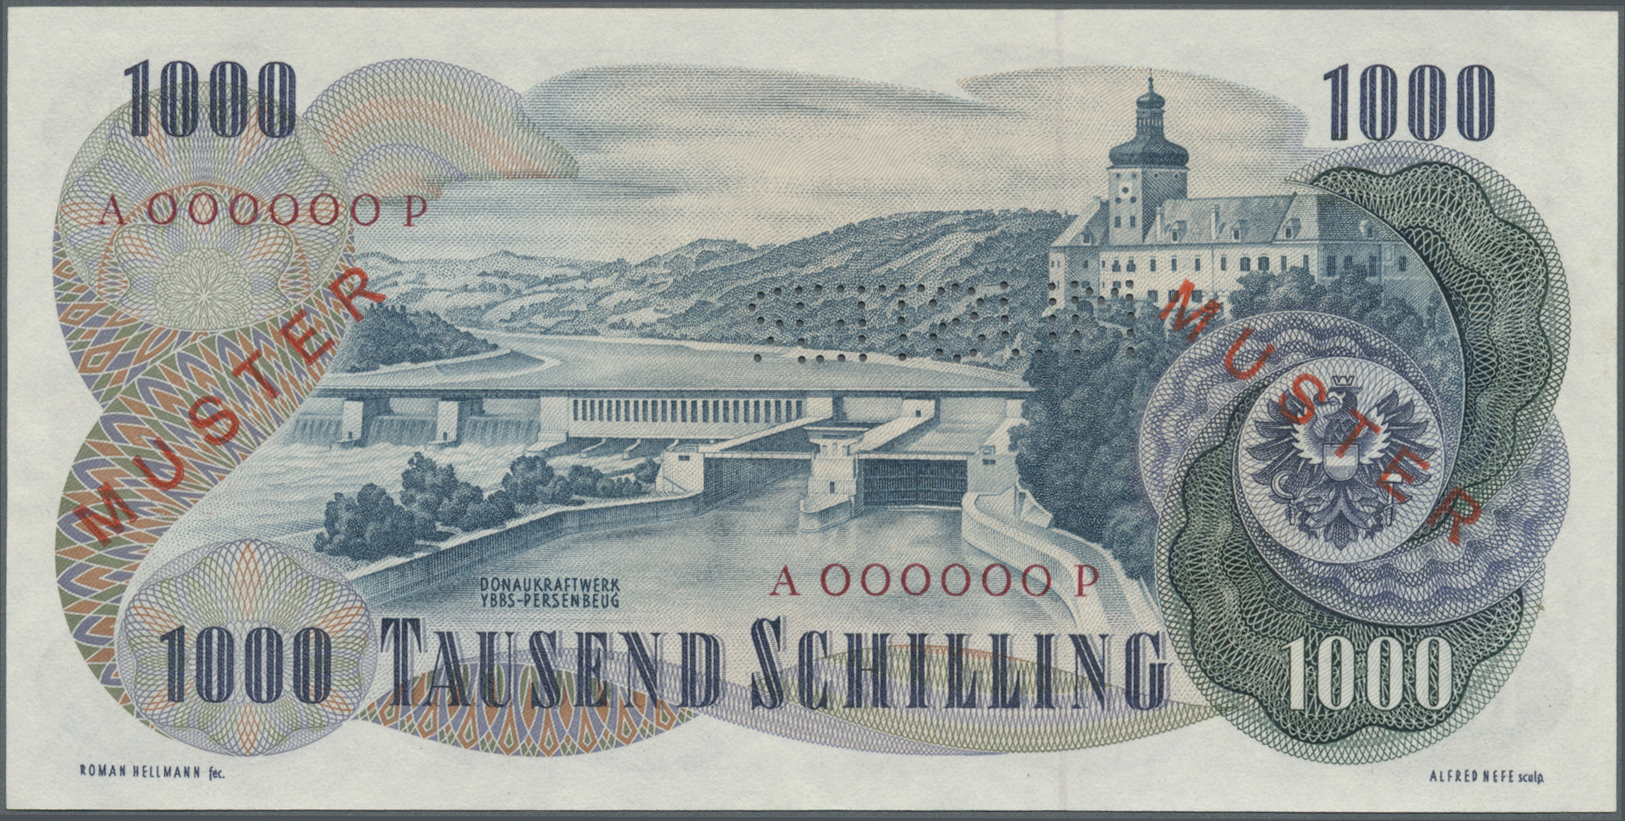 00200 Austria / Österreich: Rare high value set of 20 Specimen banknotes from Austria containing the following notes: 50